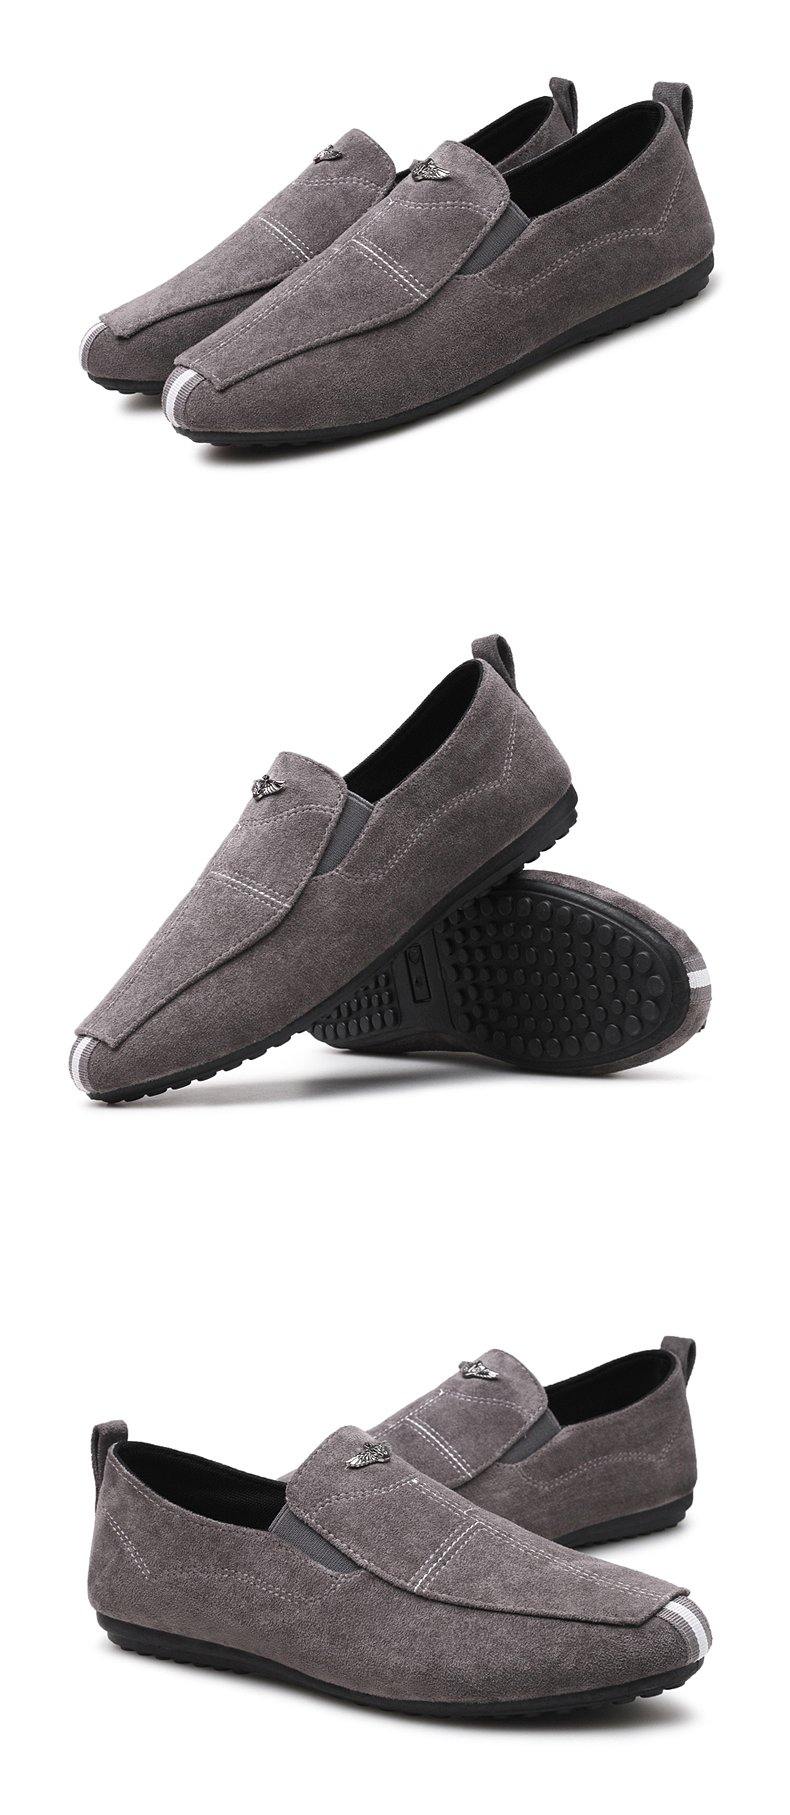 Men's Casual Slip-On Moccasin Driving Loafers - AM APPAREL